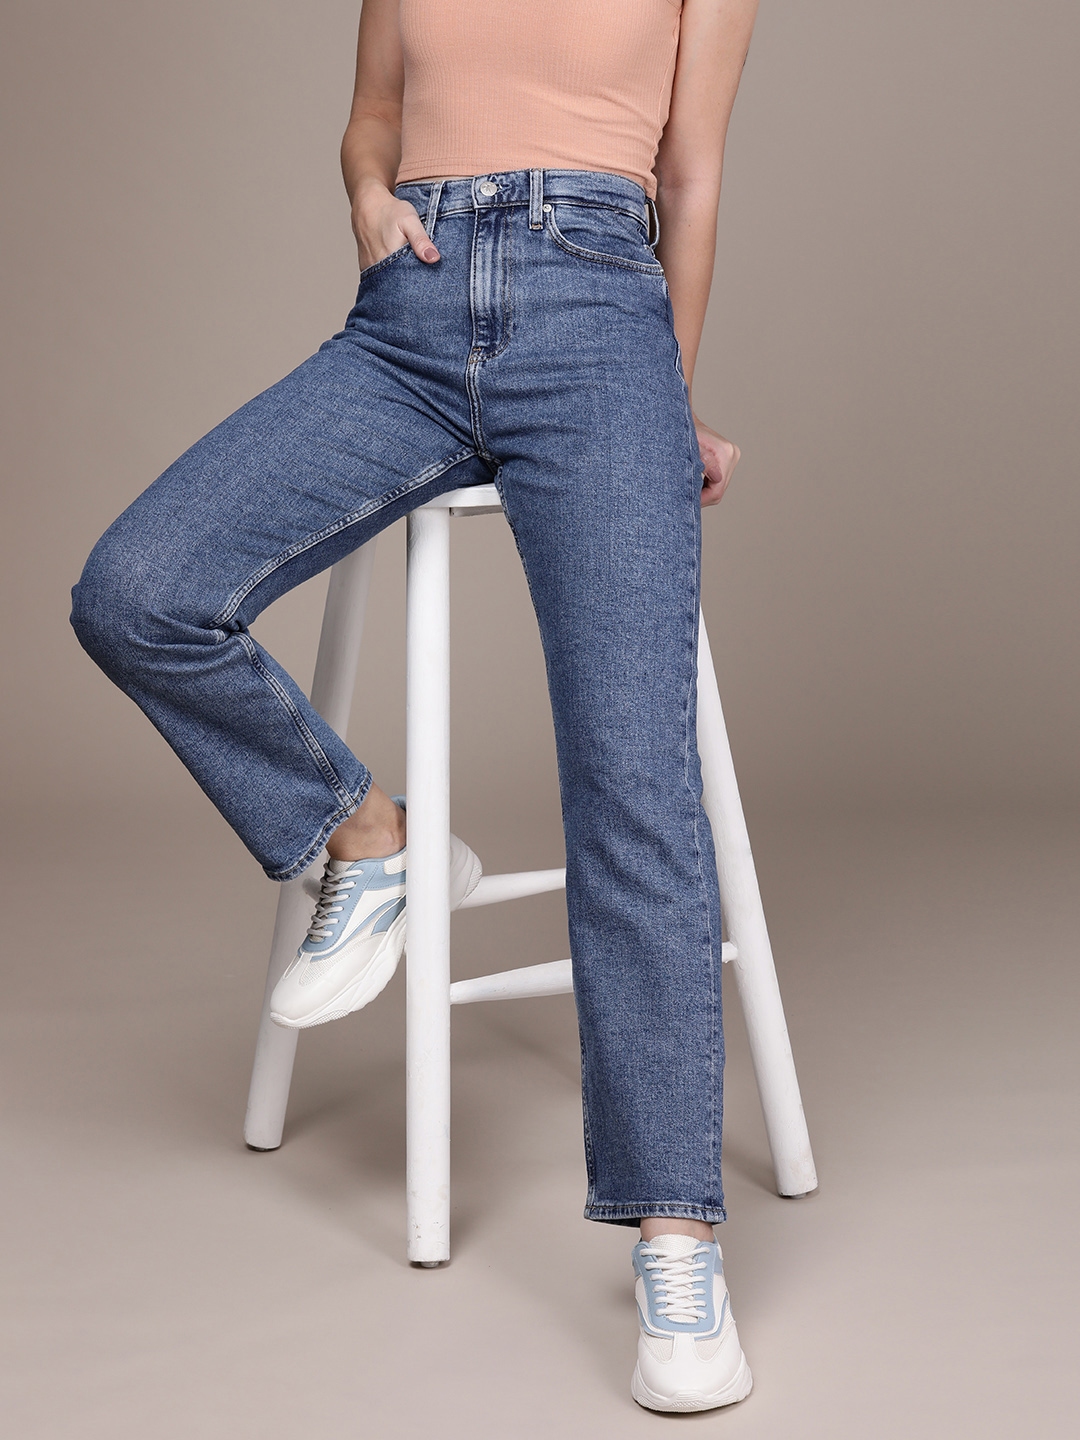 The 7 Best Jeans for Women Over 40, Hands Down | Who What Wear-saigonsouth.com.vn